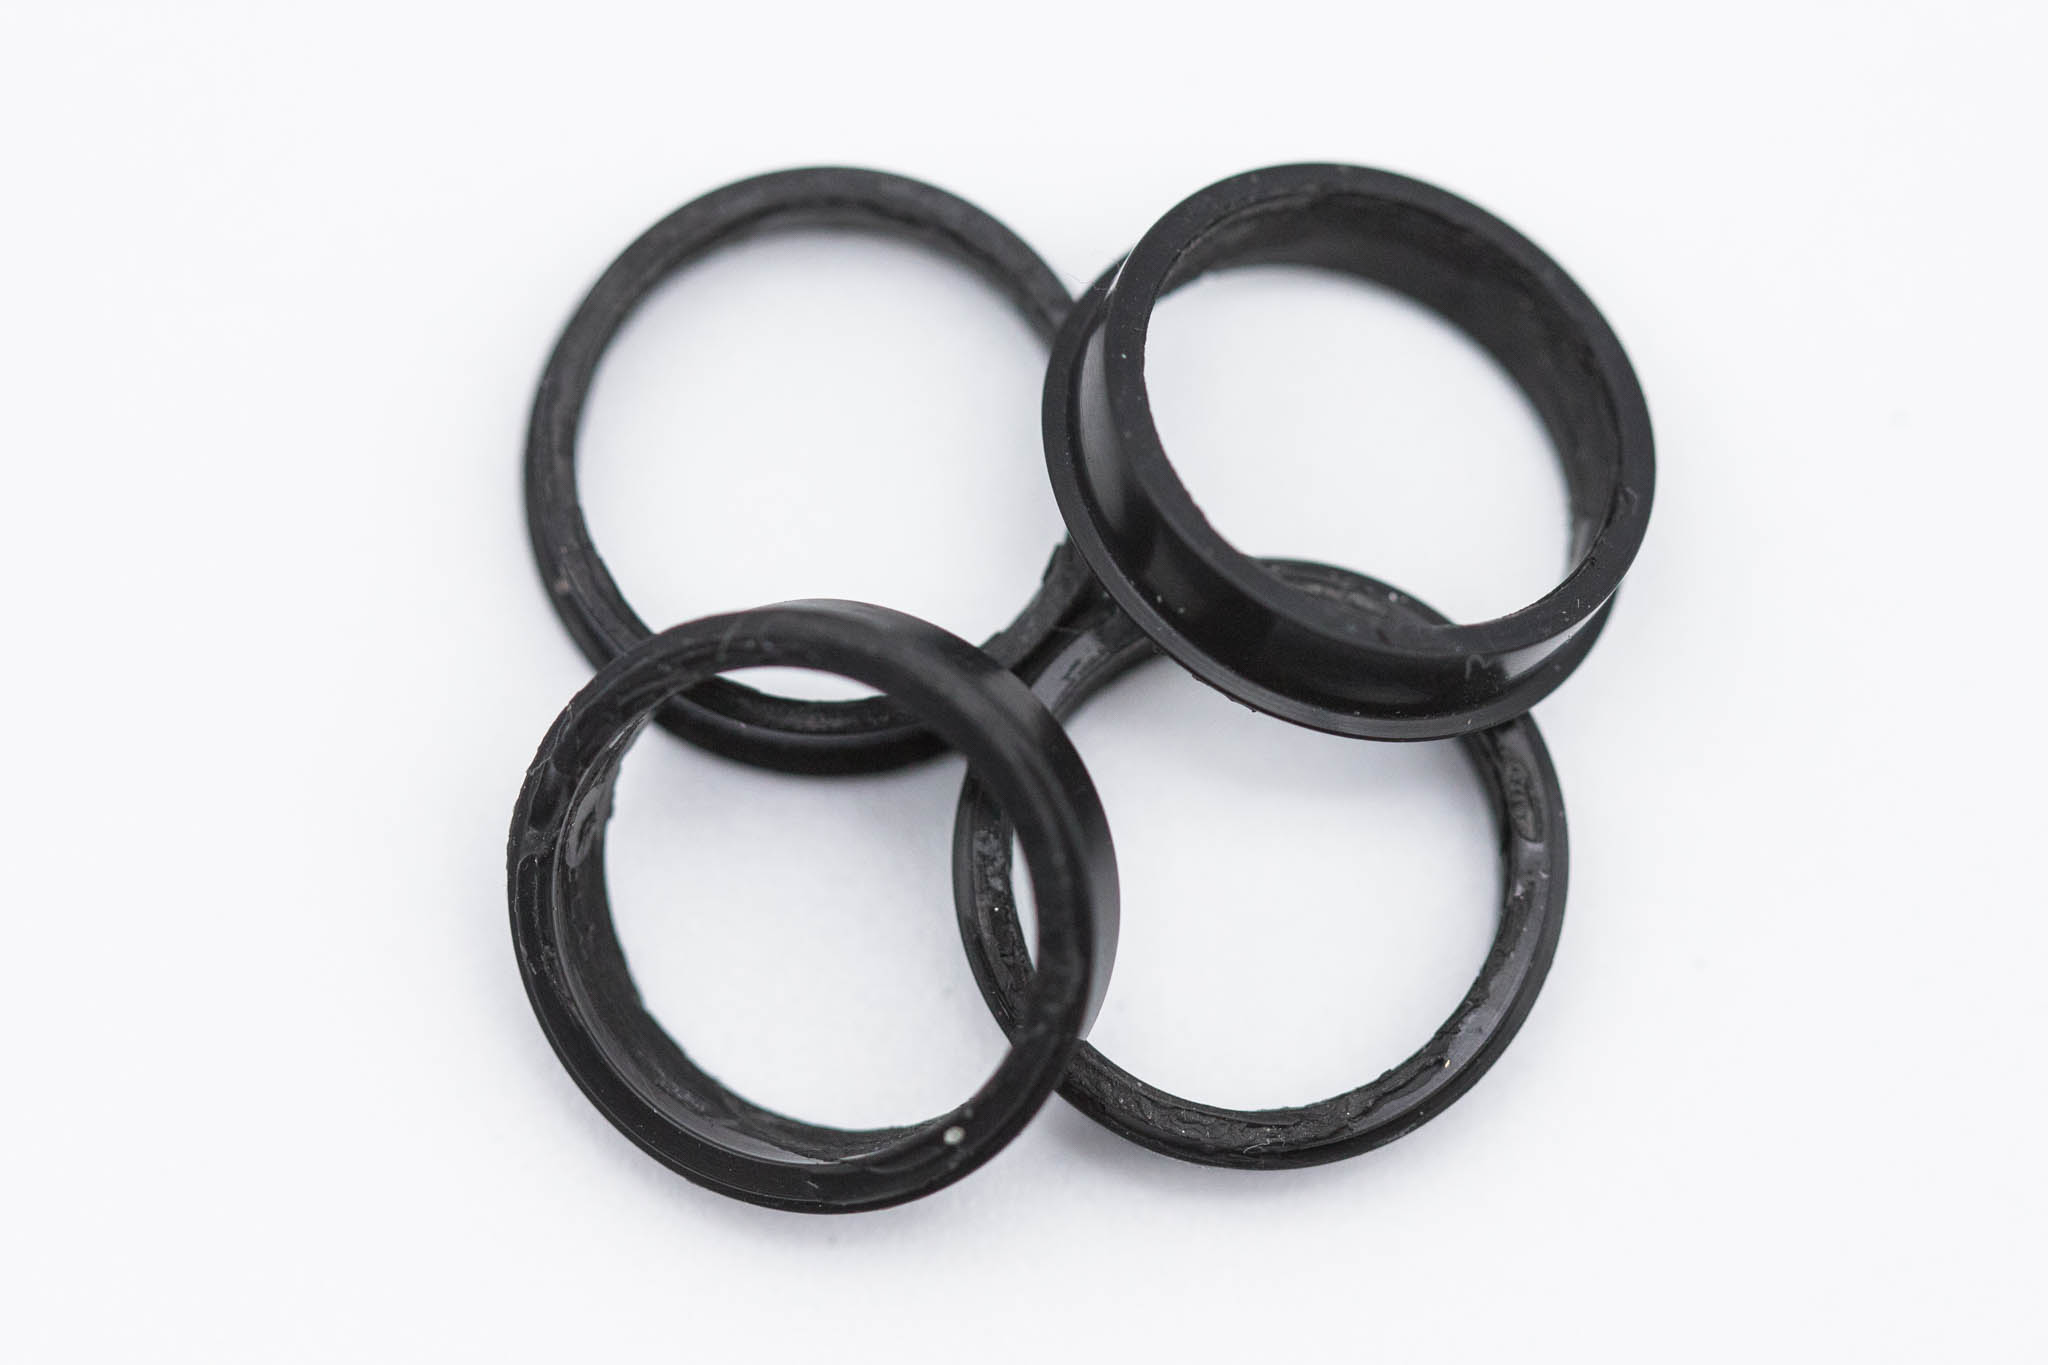 OEM Rubber Cover: Insertion Tube Boot - BF-Q190, BF-H190, BF-1TH190, BF-P190, BF-XP190